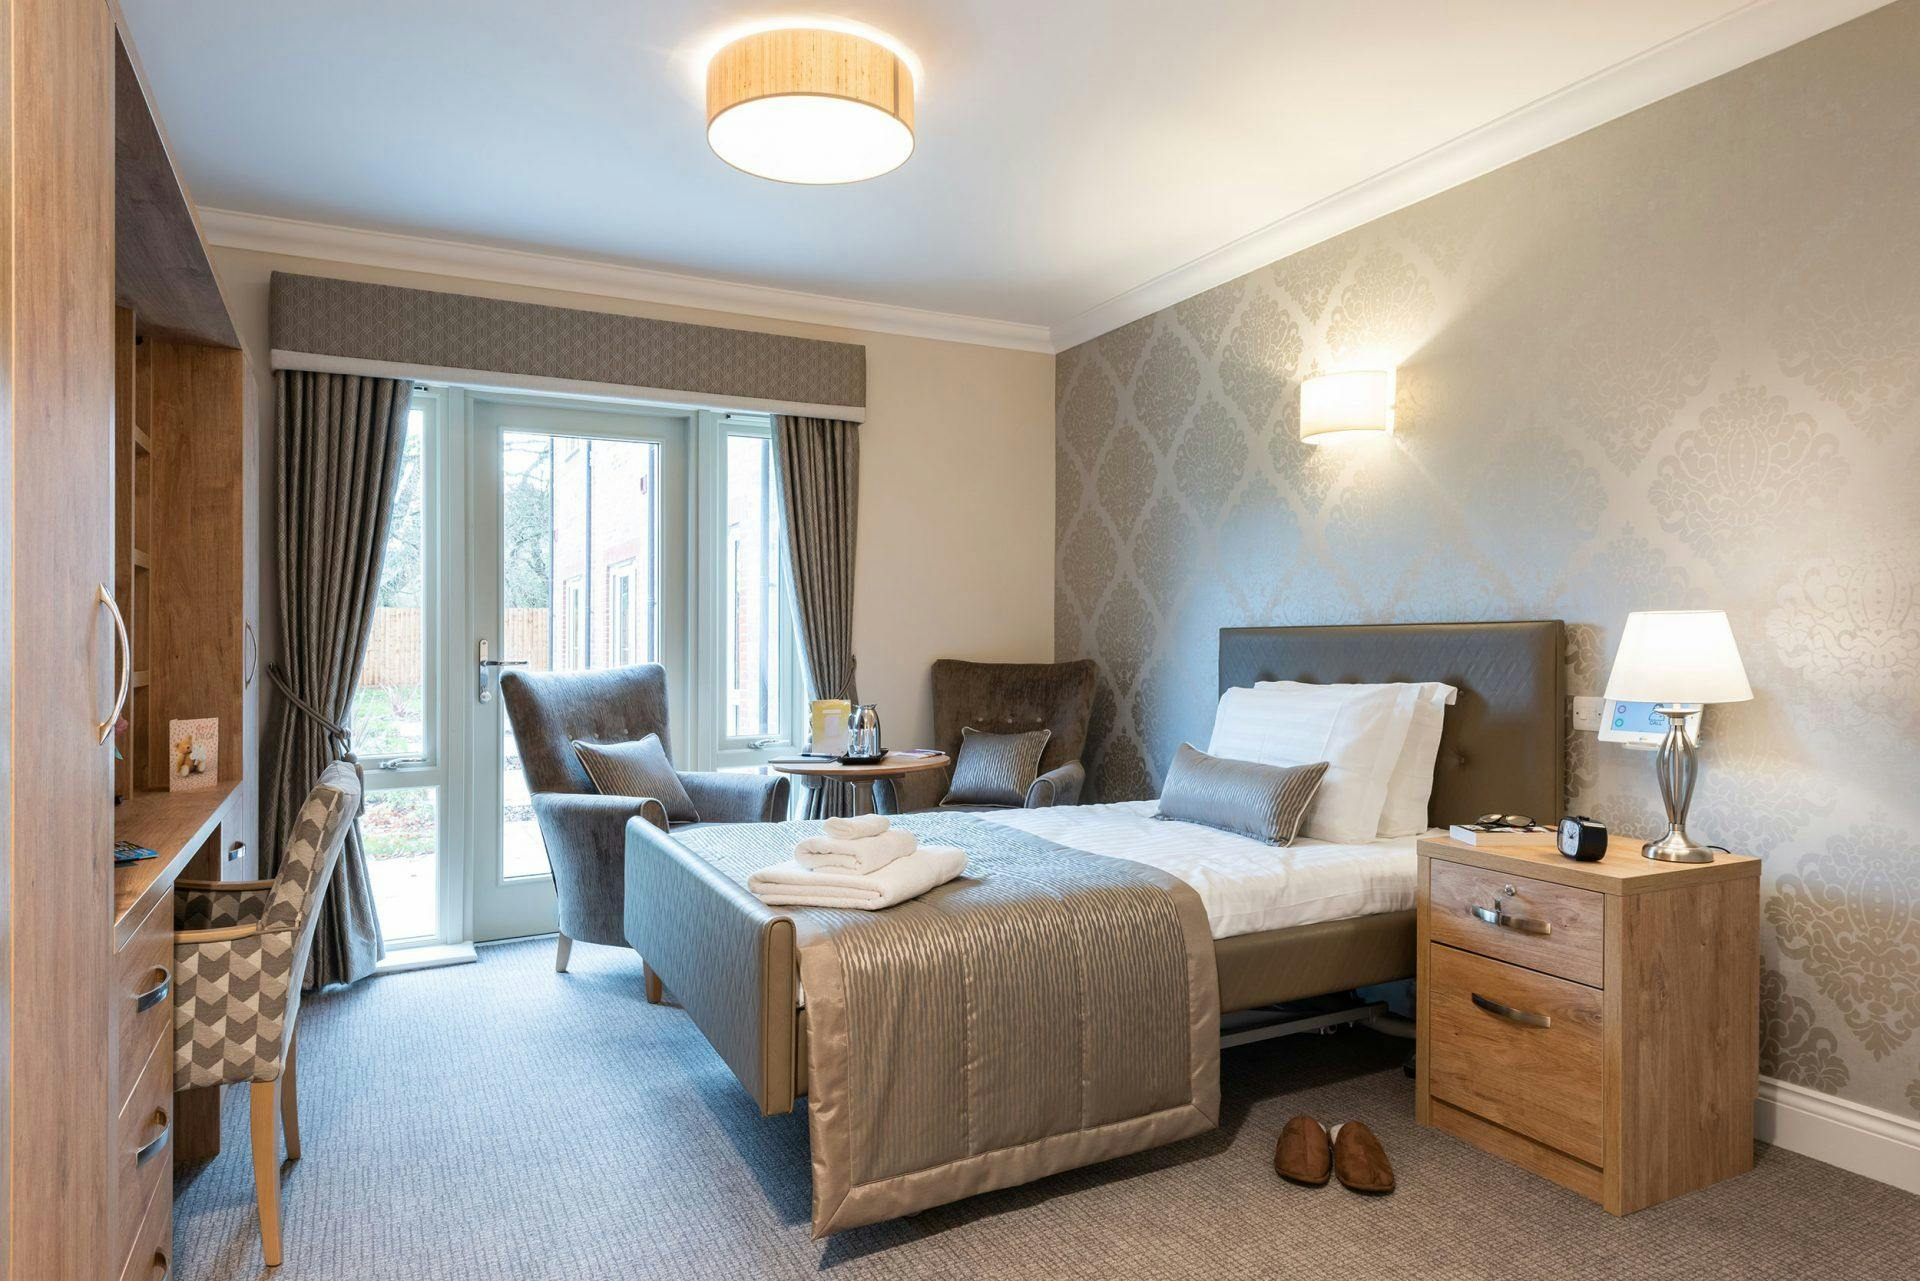 Bedroom of Lakeview Grange care home in Chichester, West Sussex